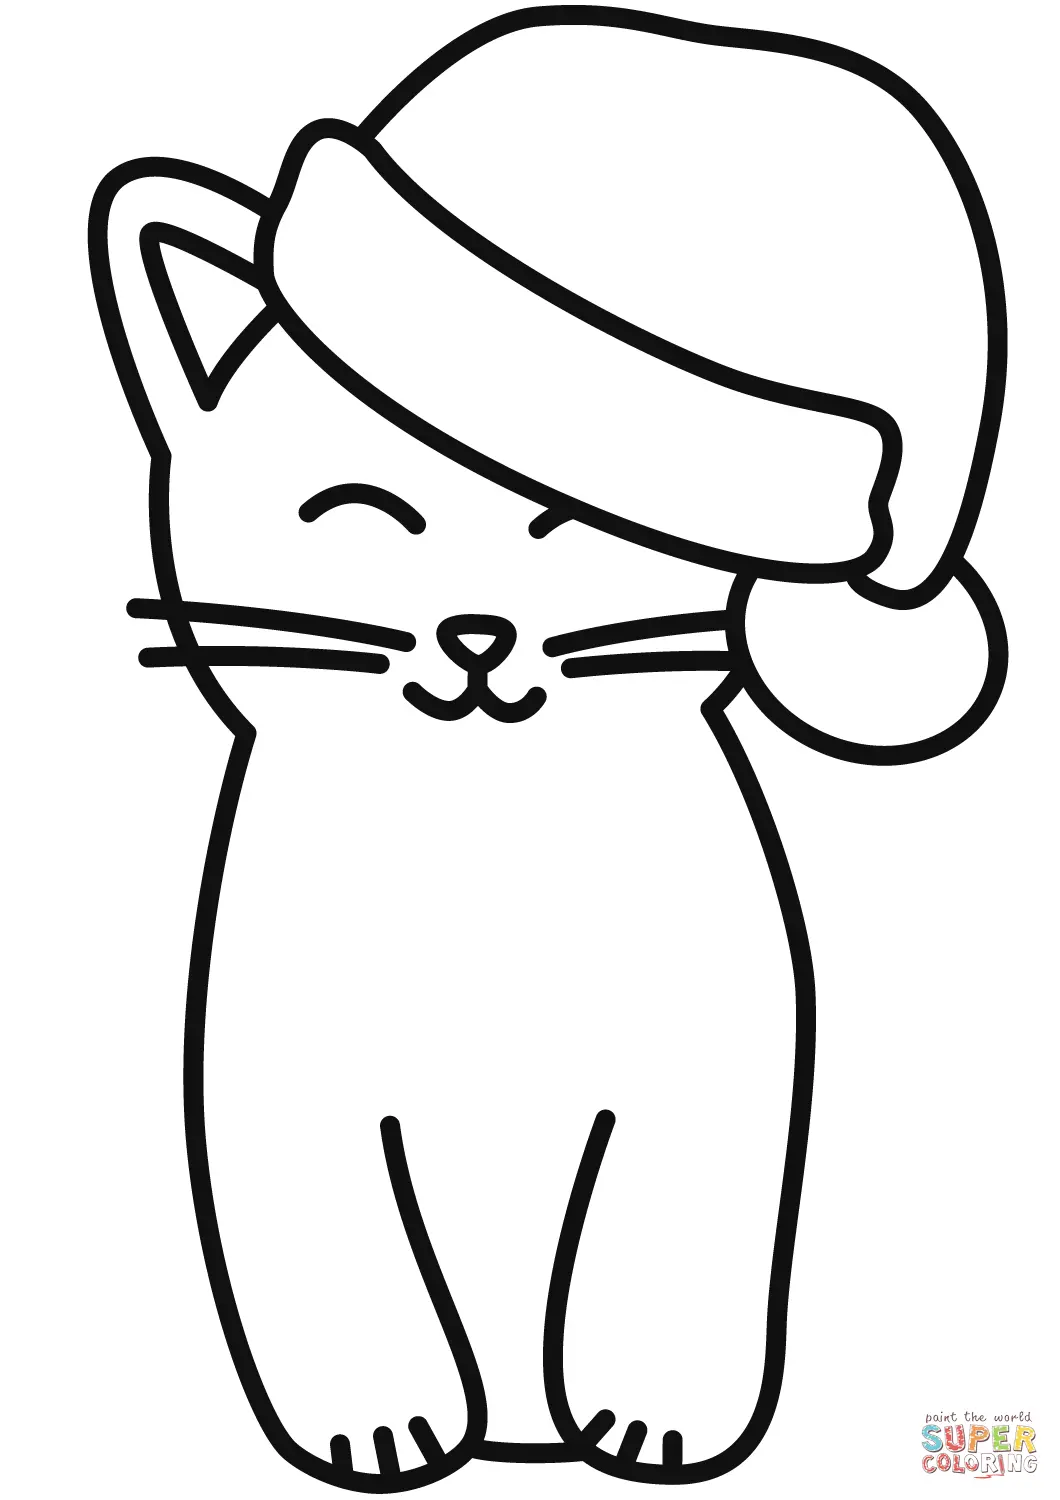 Christmas Cats Coloring Pages